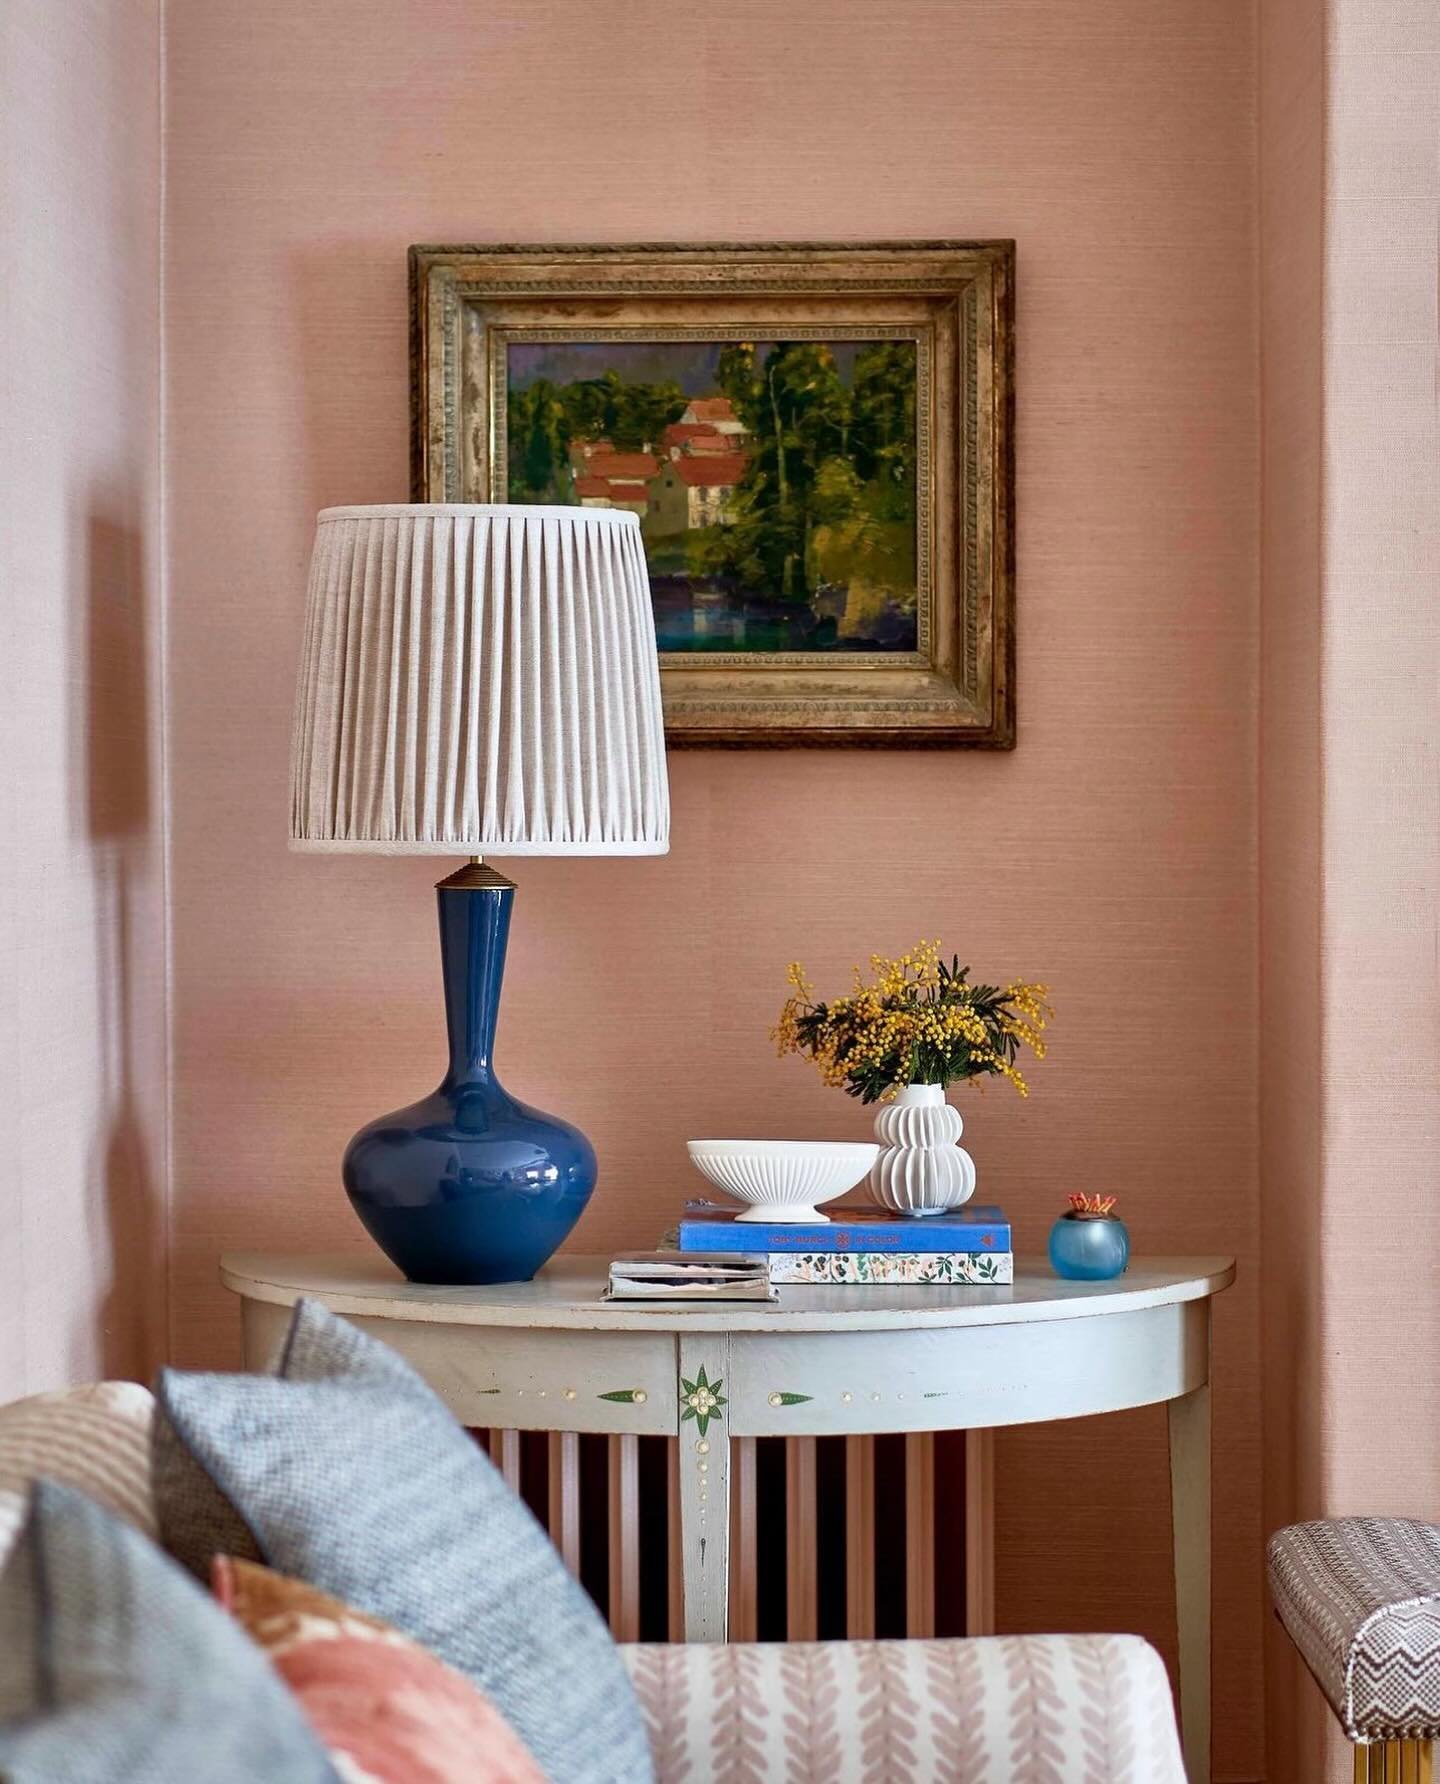 I do love a pink wall and it works so wonderfully as a backdrop for our paintings. 💕

Art work @the_picturegallery 
Interiors @olivine_design 
Photography @milobrown_photography 
.
.
#pinkinteriors #pinkwalls #modernbritish #20thcenturyart